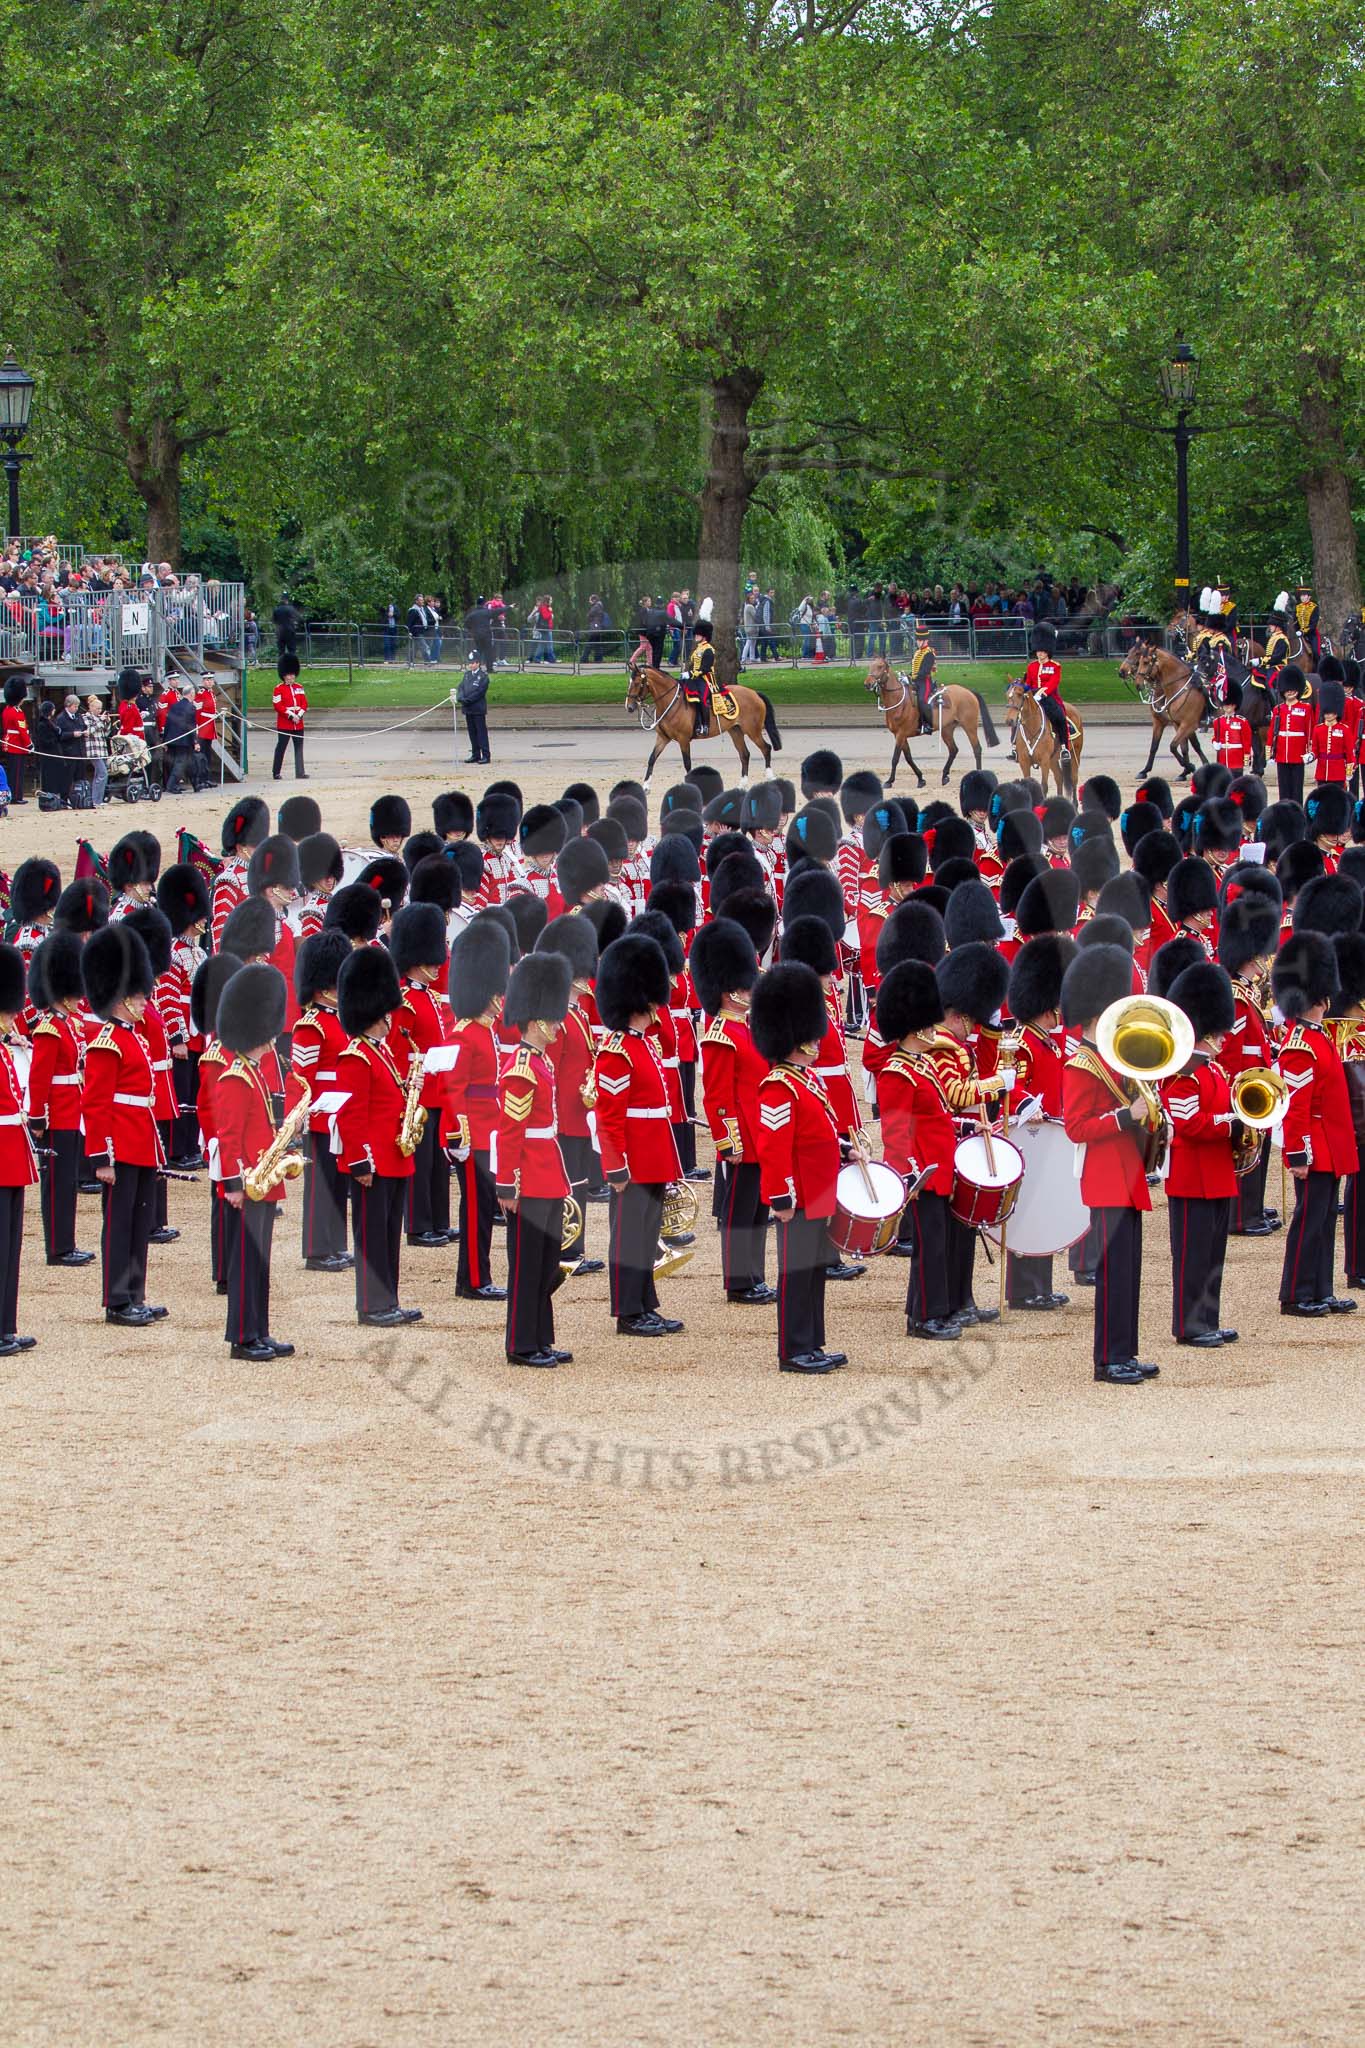 The Colonel's Review 2012: The March Past: After the Massed Bands have repositioned, the King's Troop Royal Horse Artillery starts their Ride Past around the parade ground..
Horse Guards Parade, Westminster,
London SW1,

United Kingdom,
on 09 June 2012 at 11:50, image #381